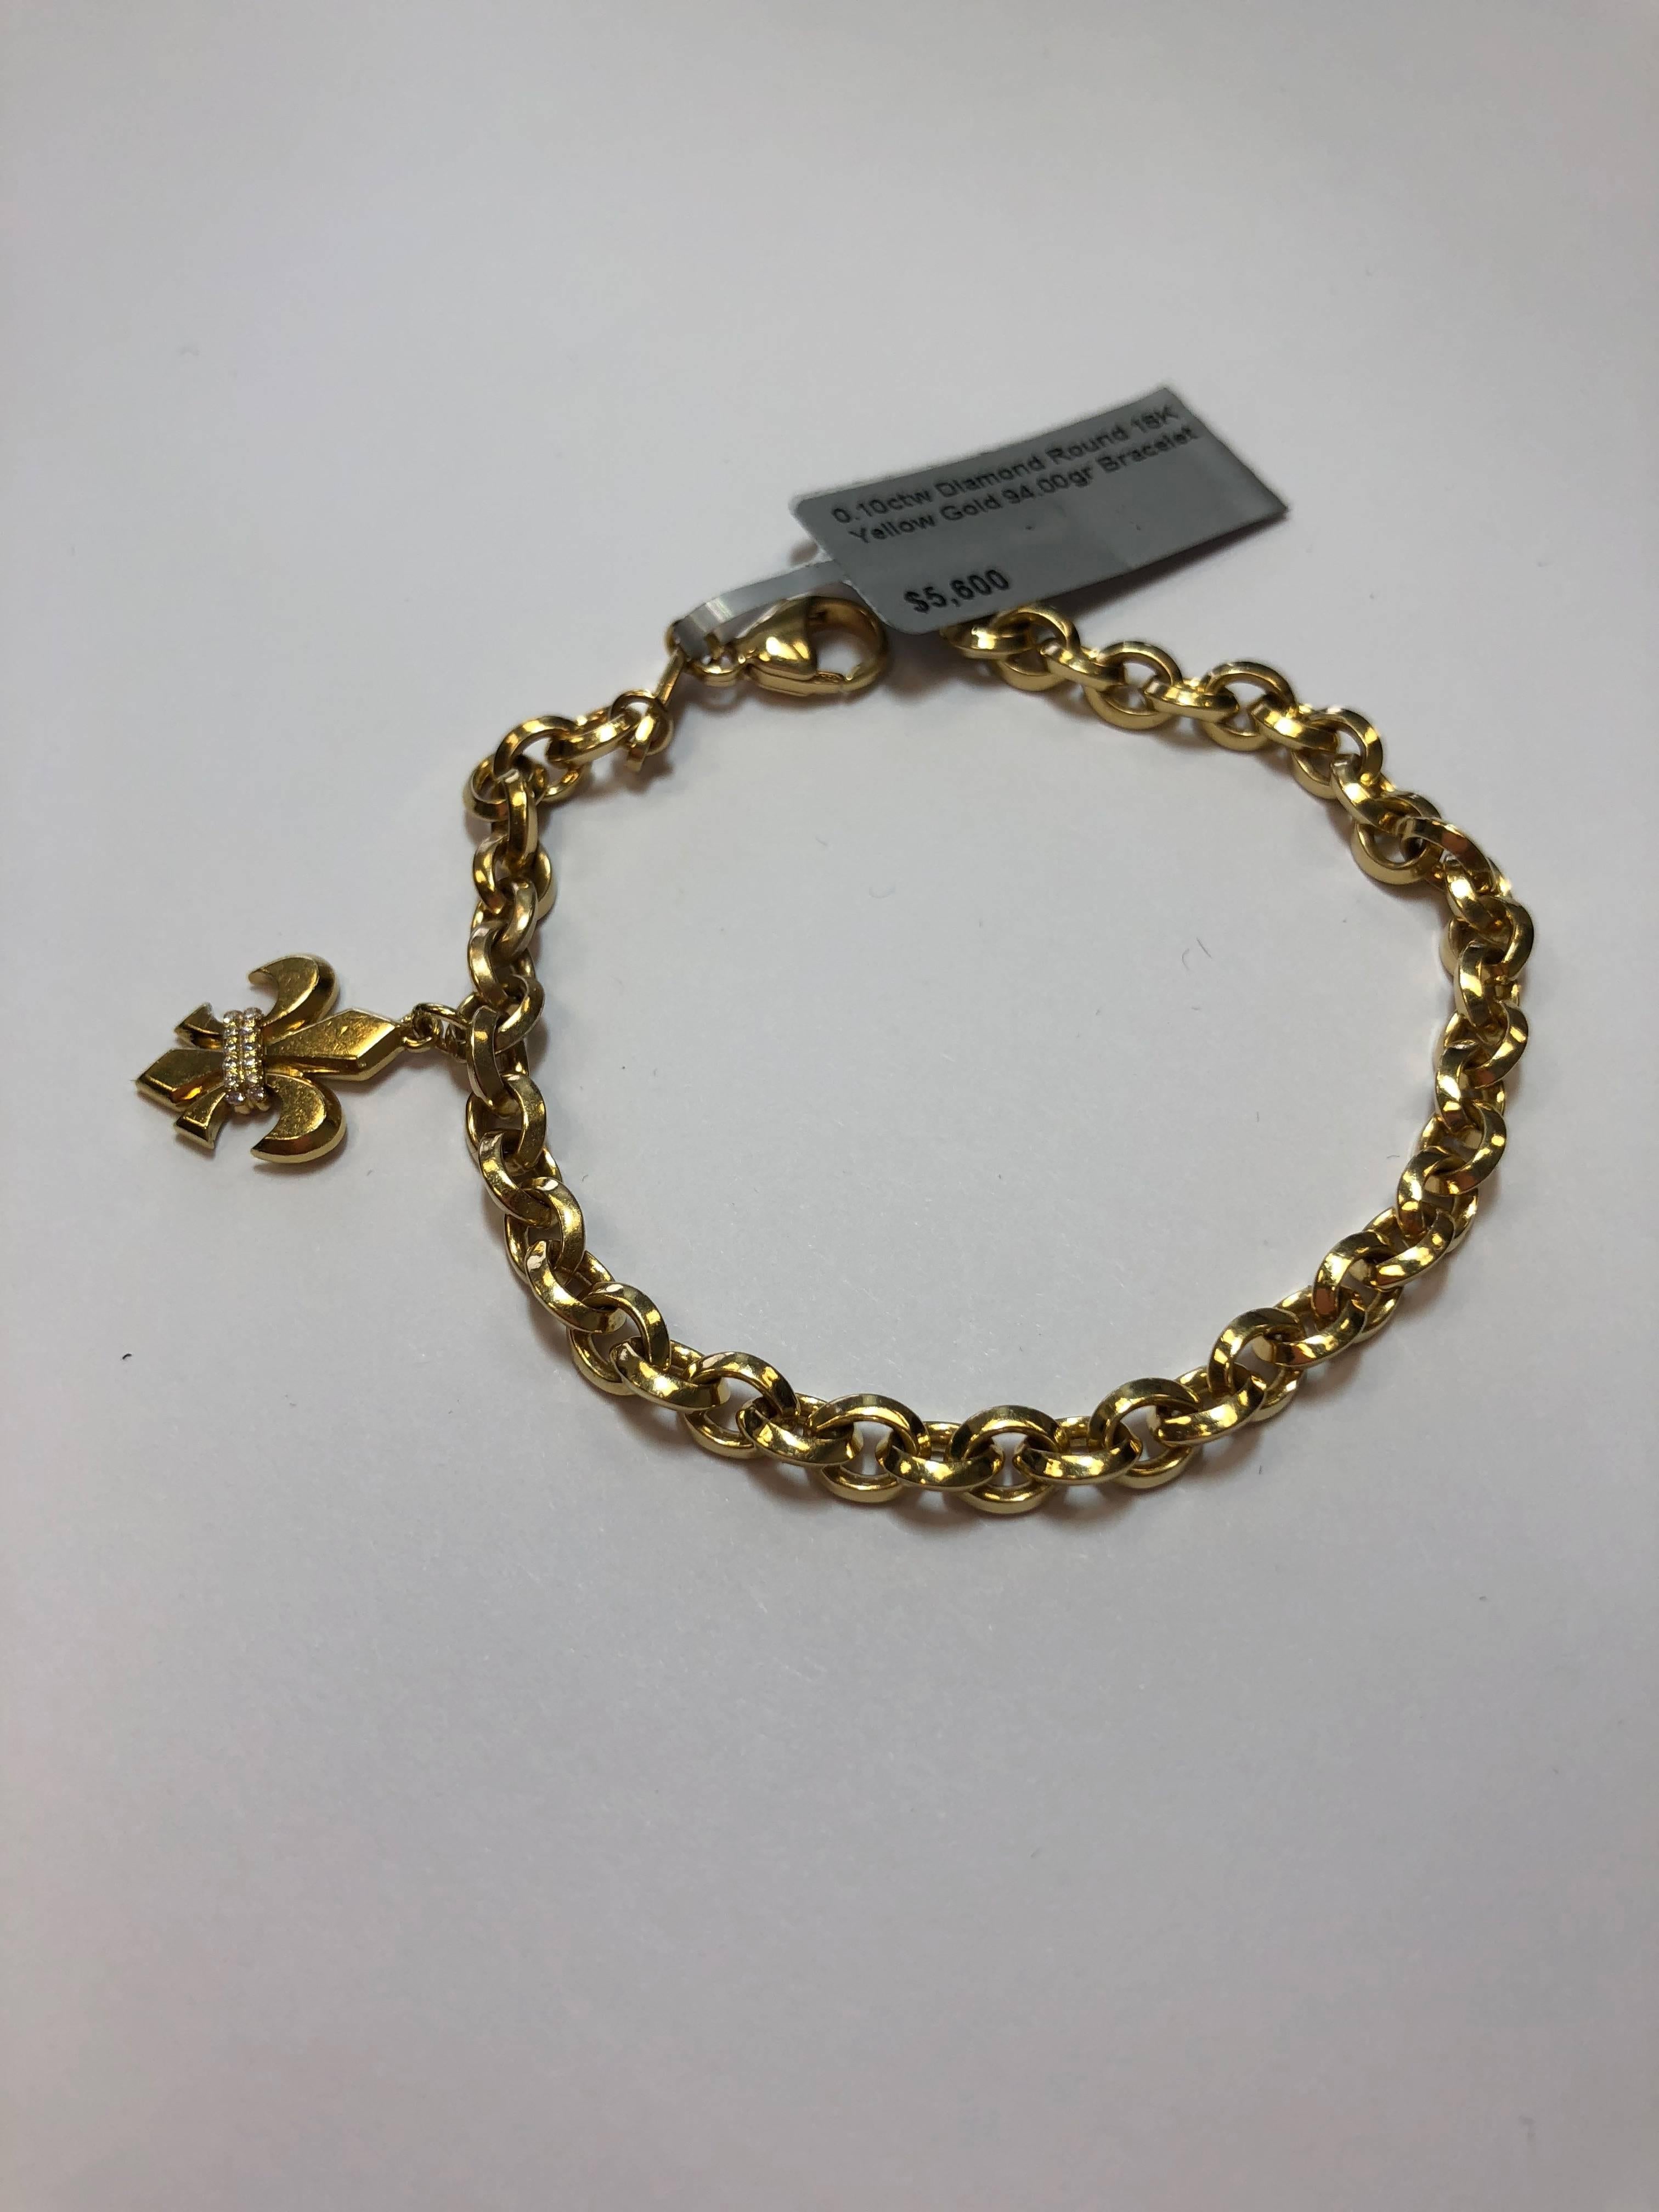 0.10 carats of white diamonds in this fleur de lis 18k yellow gold charm bracelet.  This bracelet is the perfect mix of trendy and classic.  Perfect to stack with other bracelets or a watch or wear on it's own.  